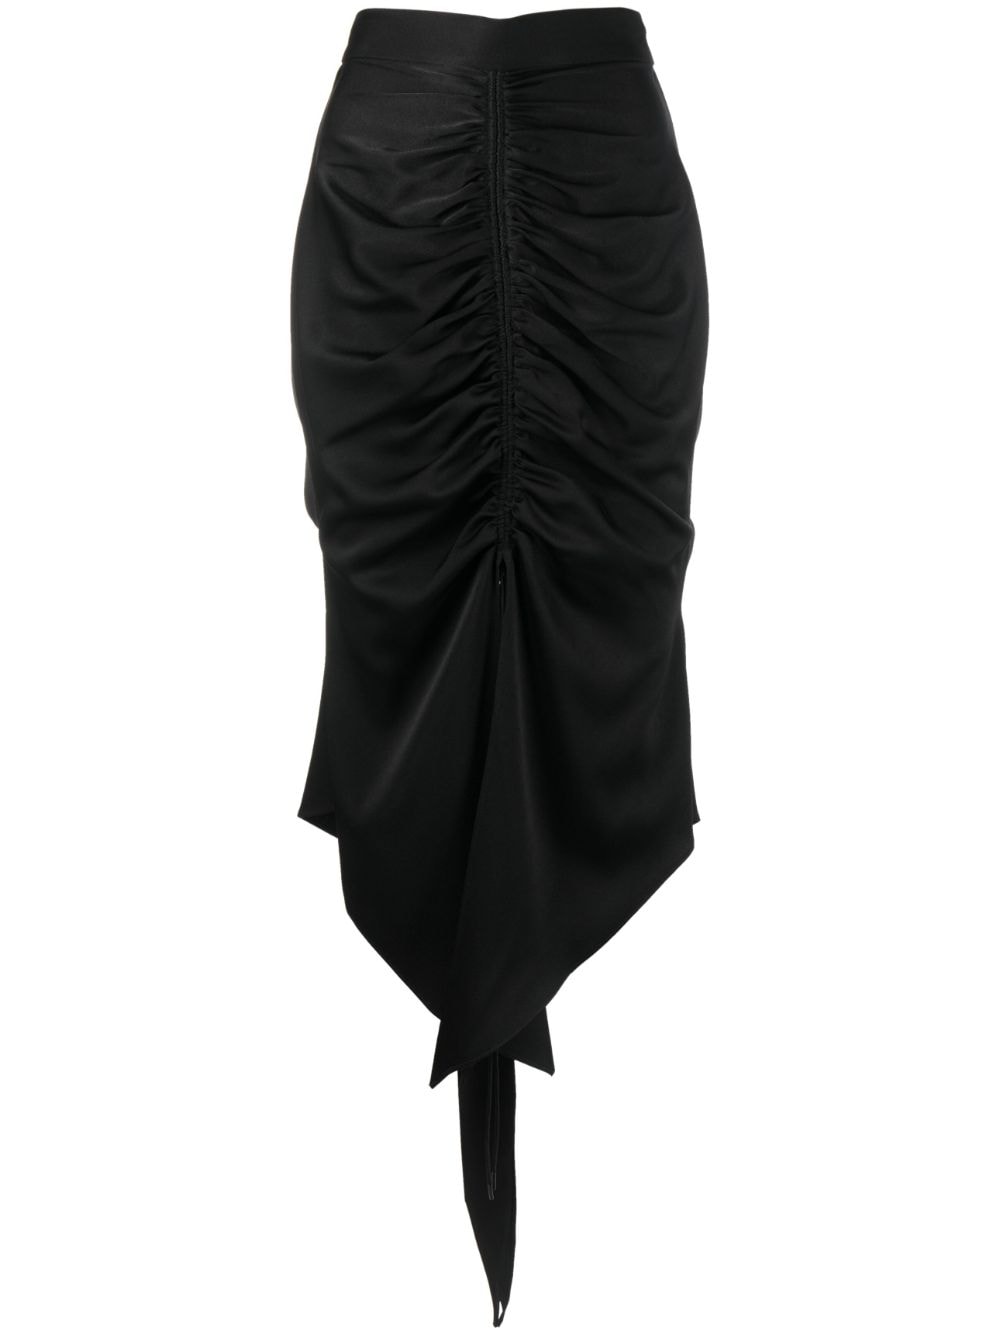 Alex Perry high-waisted ruched midi skirt - Black von Alex Perry